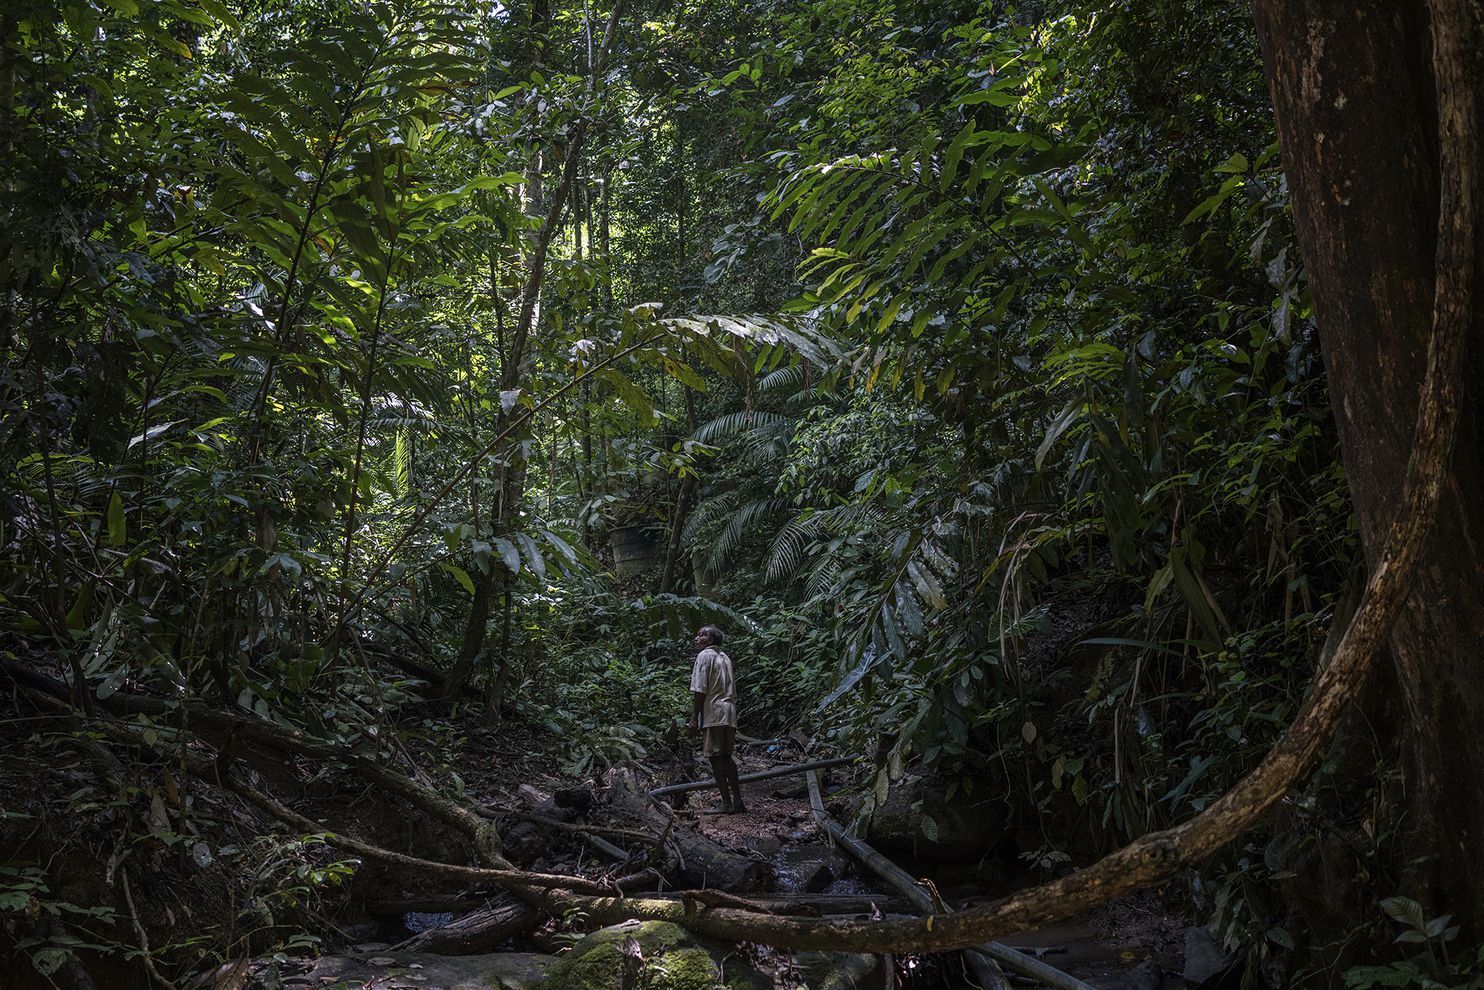 Johan Tahun pauses to search the canopy as he follows a plastic water pipe up the Tonduk River to the water source for the Batek. Although all the surrounding forest has been logged, this narrow corridor was left untouched by loggers. The problem is that a manganese mine opened in 2016 at the top of this watershed. The Batek believe that when it rains heavily, which is common in this rainforest, toxic waste from the mine wash into this ravine and contaminate their water—and they believe that mine contamination triggered the mysterious illness that claimed 16 lives in their tight community. Image by James Whitlow Delano. Malaysia, 2019.